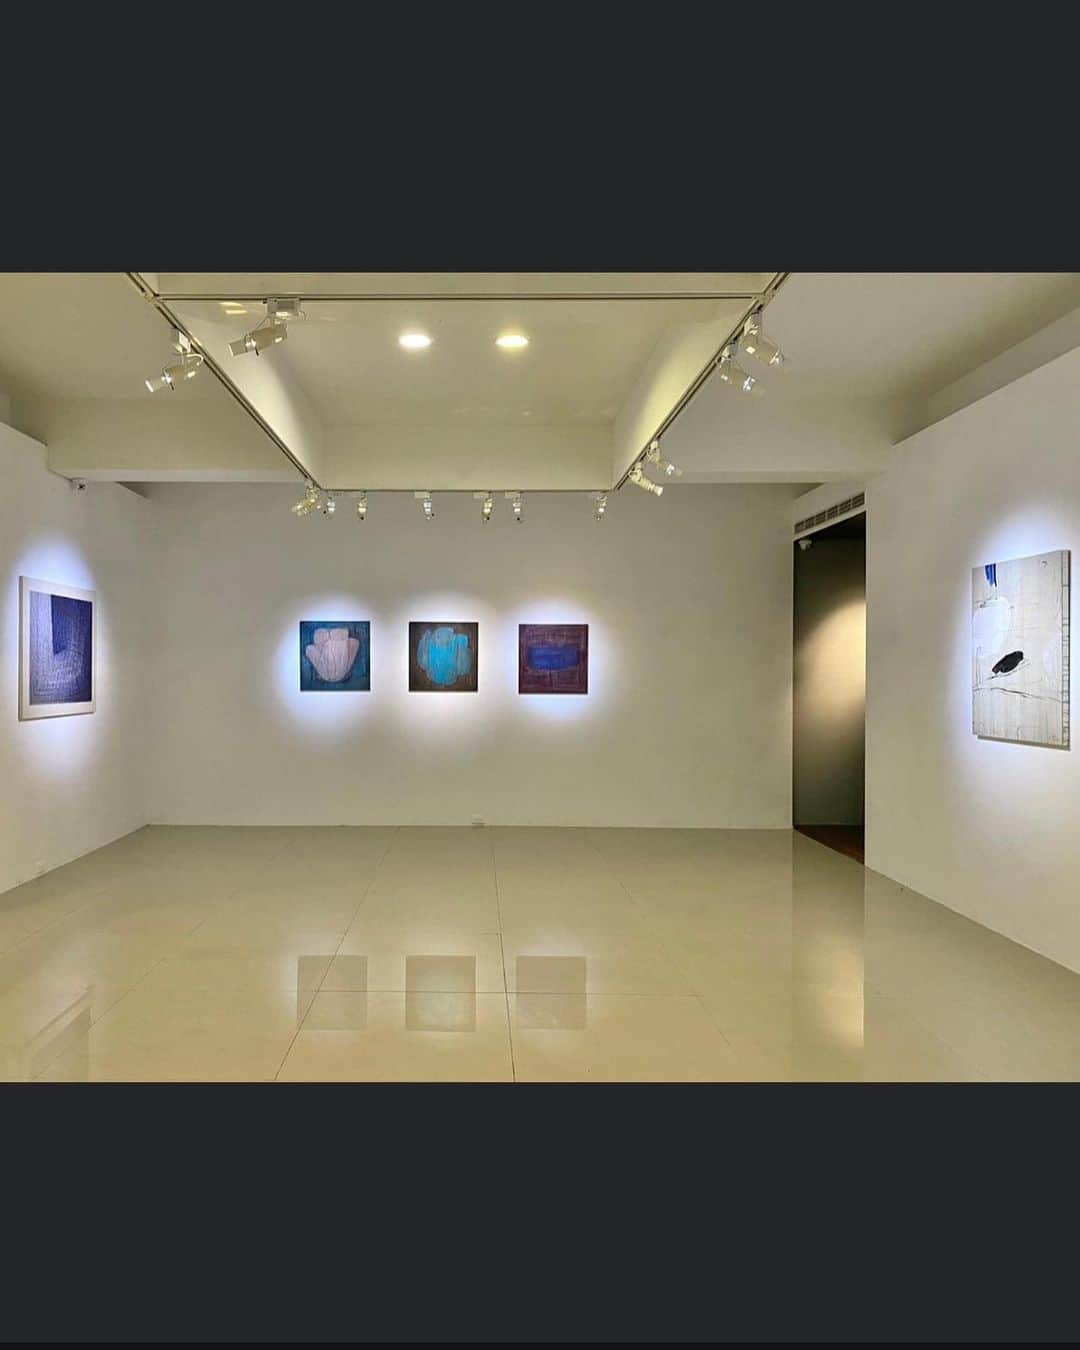 Uzo Hiramatsuさんのインスタグラム写真 - (Uzo HiramatsuInstagram)「Soka Art Tainan has posted information on the two-person exhibition from today on Facebook.  I will post the wonderful sentences as they are.  詠嘆萬物凋零之美以及人世的無常，日本文學中的「物哀」開創了西方藝術史上從未涉及的概念。日本自由律俳句大師 ＃種田山頭火 曾用「雪落在雪上」（雪へ雪ふるしづけさにをる）來描寫寧靜，他運用最單純的自然的景色來抒發自身的感悟，在清寂裡能夠觸摸到禪意，並獲得安寧。索卡藝術誠摯邀請您蒞臨2021年2月27日下午4點《＃鏡中鏡》＃平松宇造、＃高島進 雙個展開幕活動， 感受最獨特的日式美學。  Praising the beauty of the withering of all things and the feeling of the impermanence of the world, the "Mono no aware" in Japanese literature created a concept that has never been involved in the history of Western art. The Japanese haiku master Taneda Santoka once used "snow falling on the snow" to describe tranquility. He used natural scenery to express his own feelings and feel Zen in peace. The exhibition of "Spiegel im Spiegel" by ＃UzoHiramatsu and ＃SusumuTakashima will start tomorrow afternoon. Welcome to enjoy it.  參加活動了解更多 More Info https://reurl.cc/mq0YYY _______________________ 展名 |《鏡中鏡》平松宇造．高島進雙個展 展期 |2021/02/27(Sat.)-04/03 (Sat.) 開幕 |2021/02/27(Sat.) PM16:00 地點 | 索卡藝術·台南 台南市安平區慶平路446號 電話 | 06-297-3957  Exhibition: “Spiegel im Spiegel” Solo Exhibition of Uzo Hiramatsu and Susumu Takashima Date: 2021/02/27(Sat.)-04/03 (Sat.) Opening: 2021/02/27(Sat.) PM16:00 Venue: No. 446, Qingping Rd., Anping Dist., Tainan City 708 Tel: 06-297-3957  #台湾　#台南　#索卡藝術　##SokaArt  #Taiwan  #Tainan #fukuoka #contemporaryart #painting #drawing #mixedmedia #flower」2月27日 15時45分 - uzo_hiramatsu